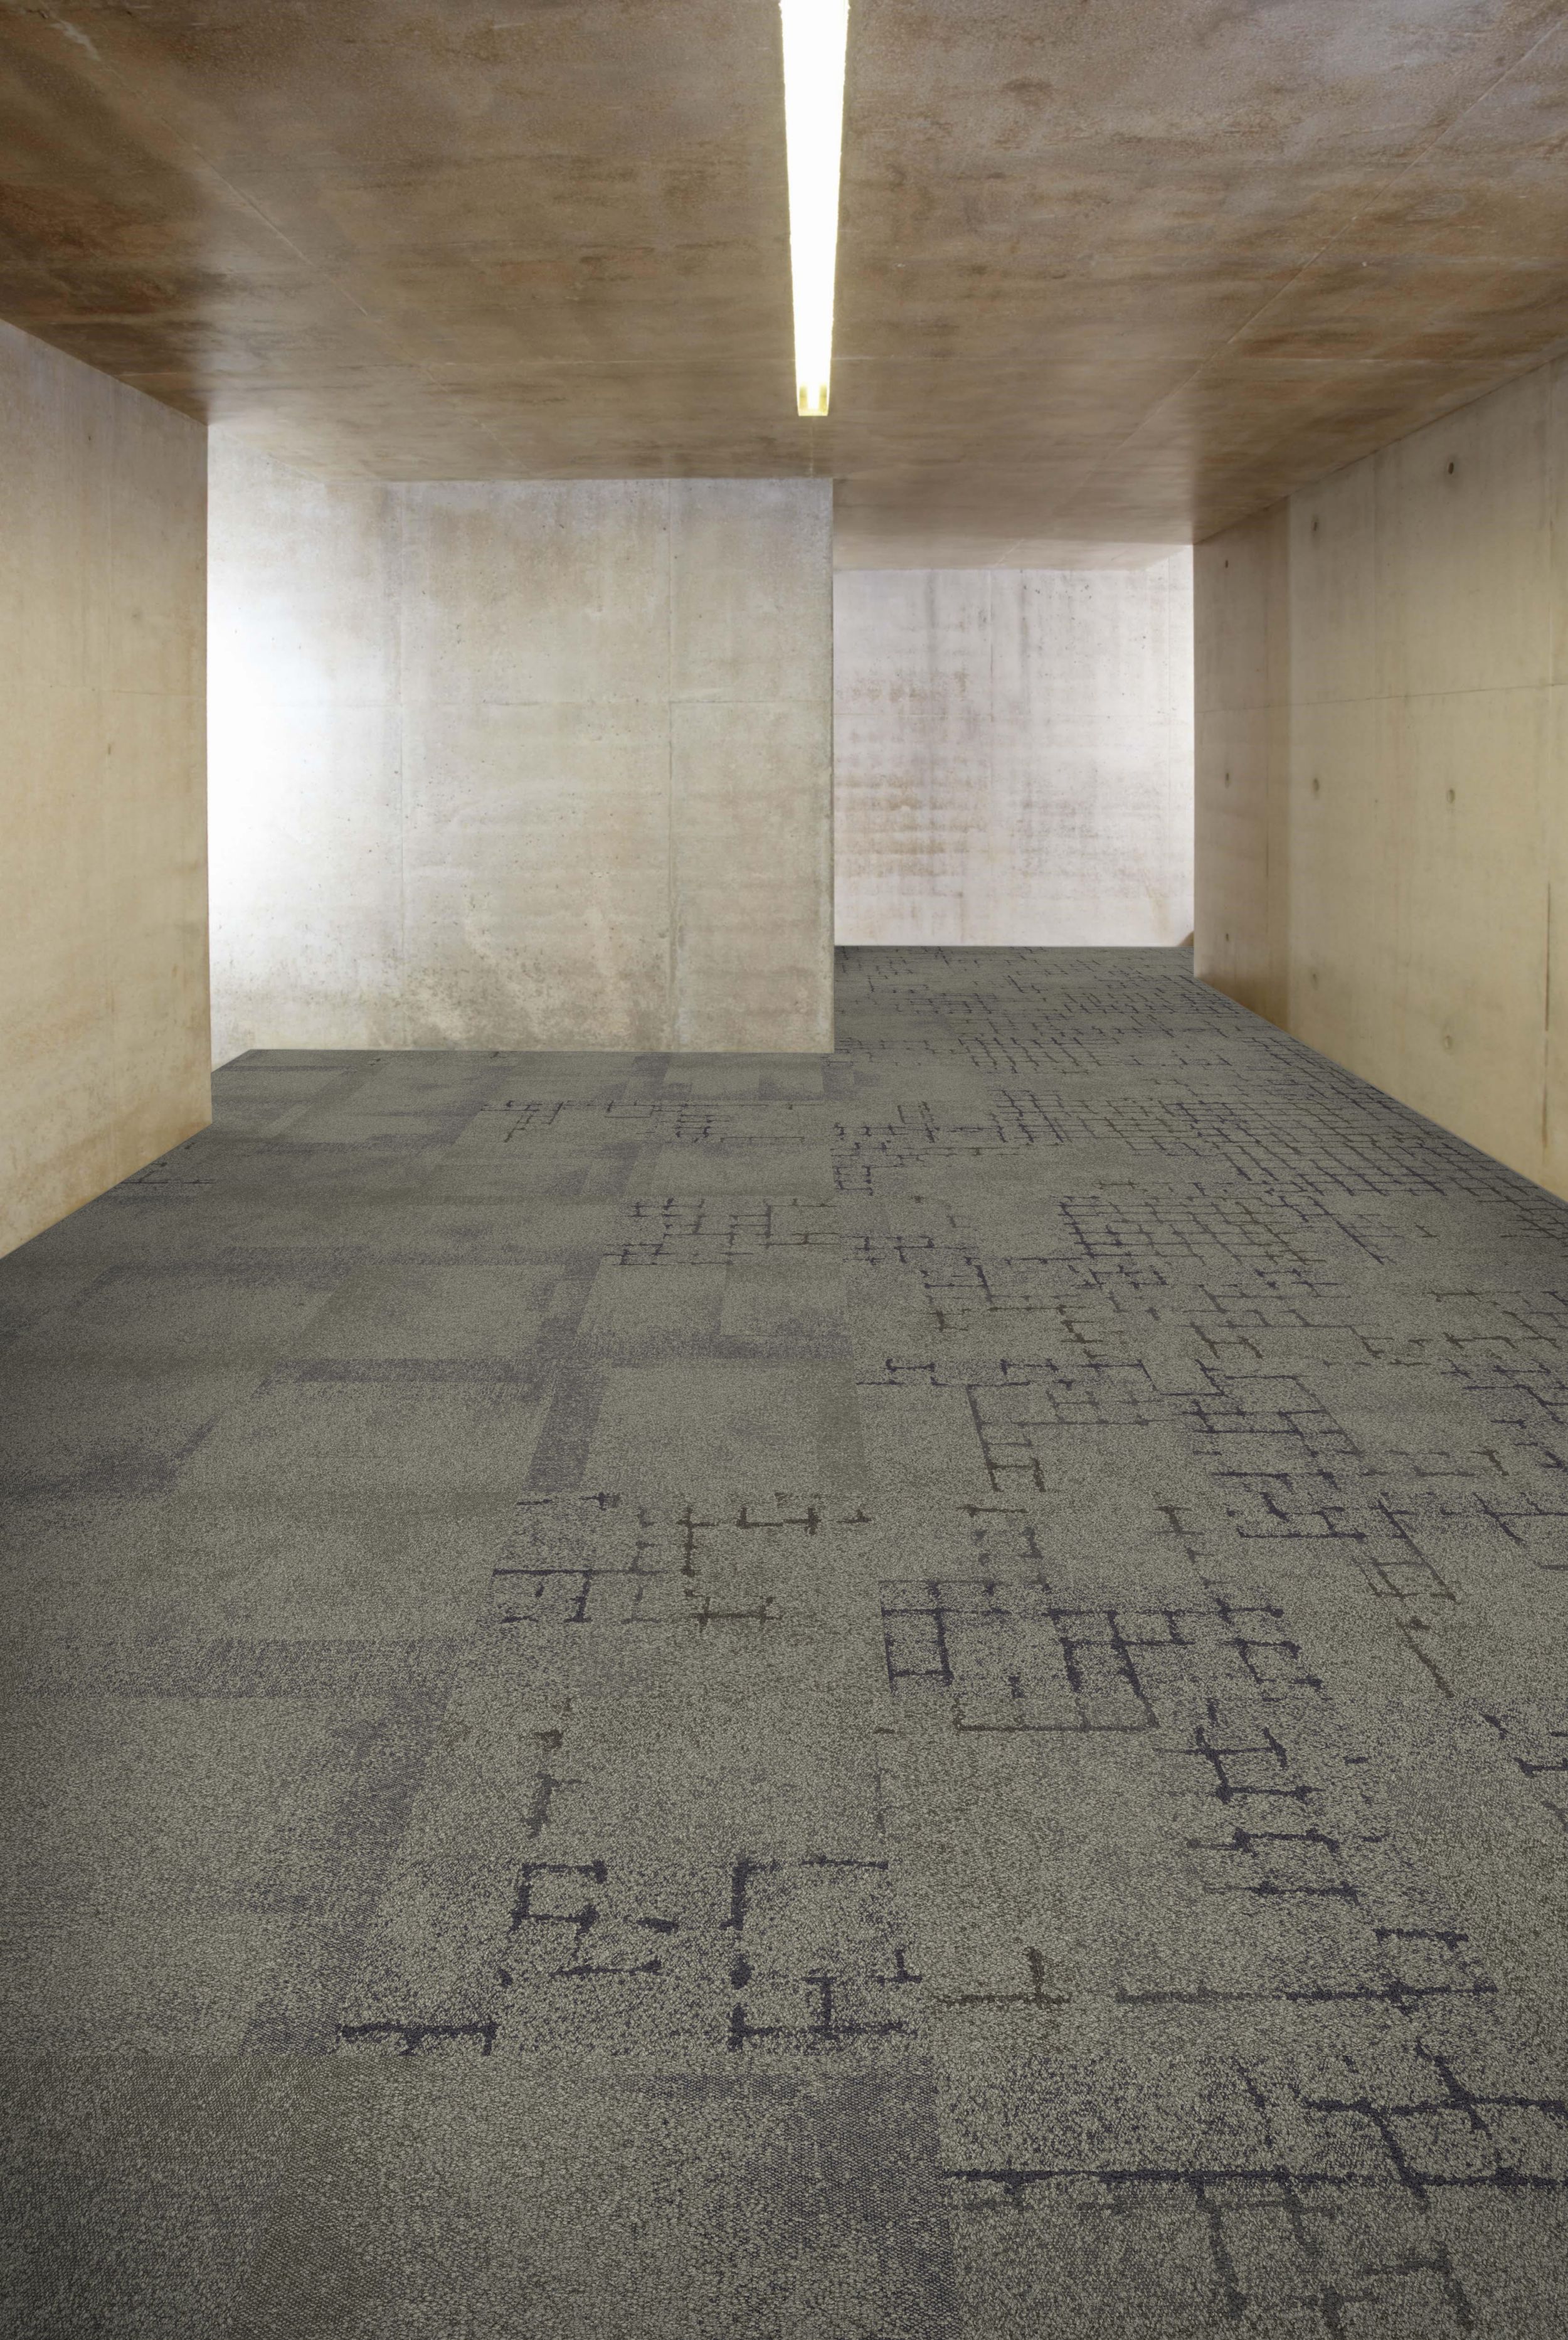 Interface Flagstone, Kerbstone and Sett in Stone carpet tile in corridor with concrete walls and ceiling imagen número 5